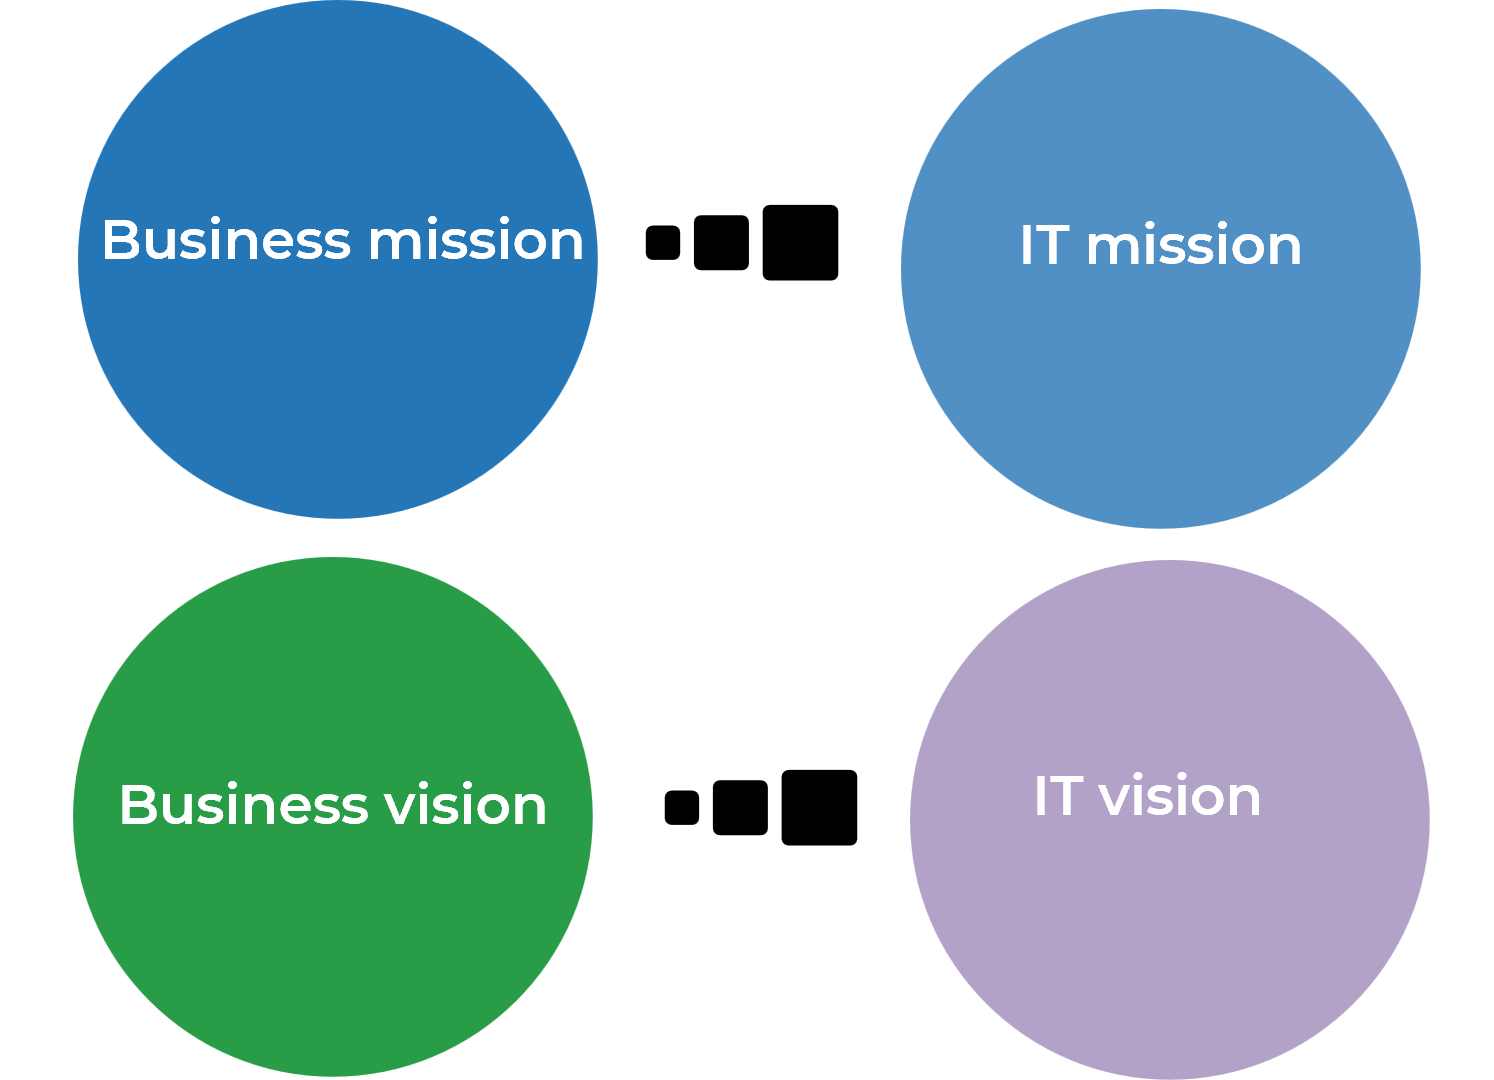 an image showing Business mission, IT mission, Business Vision, and IT Vison.